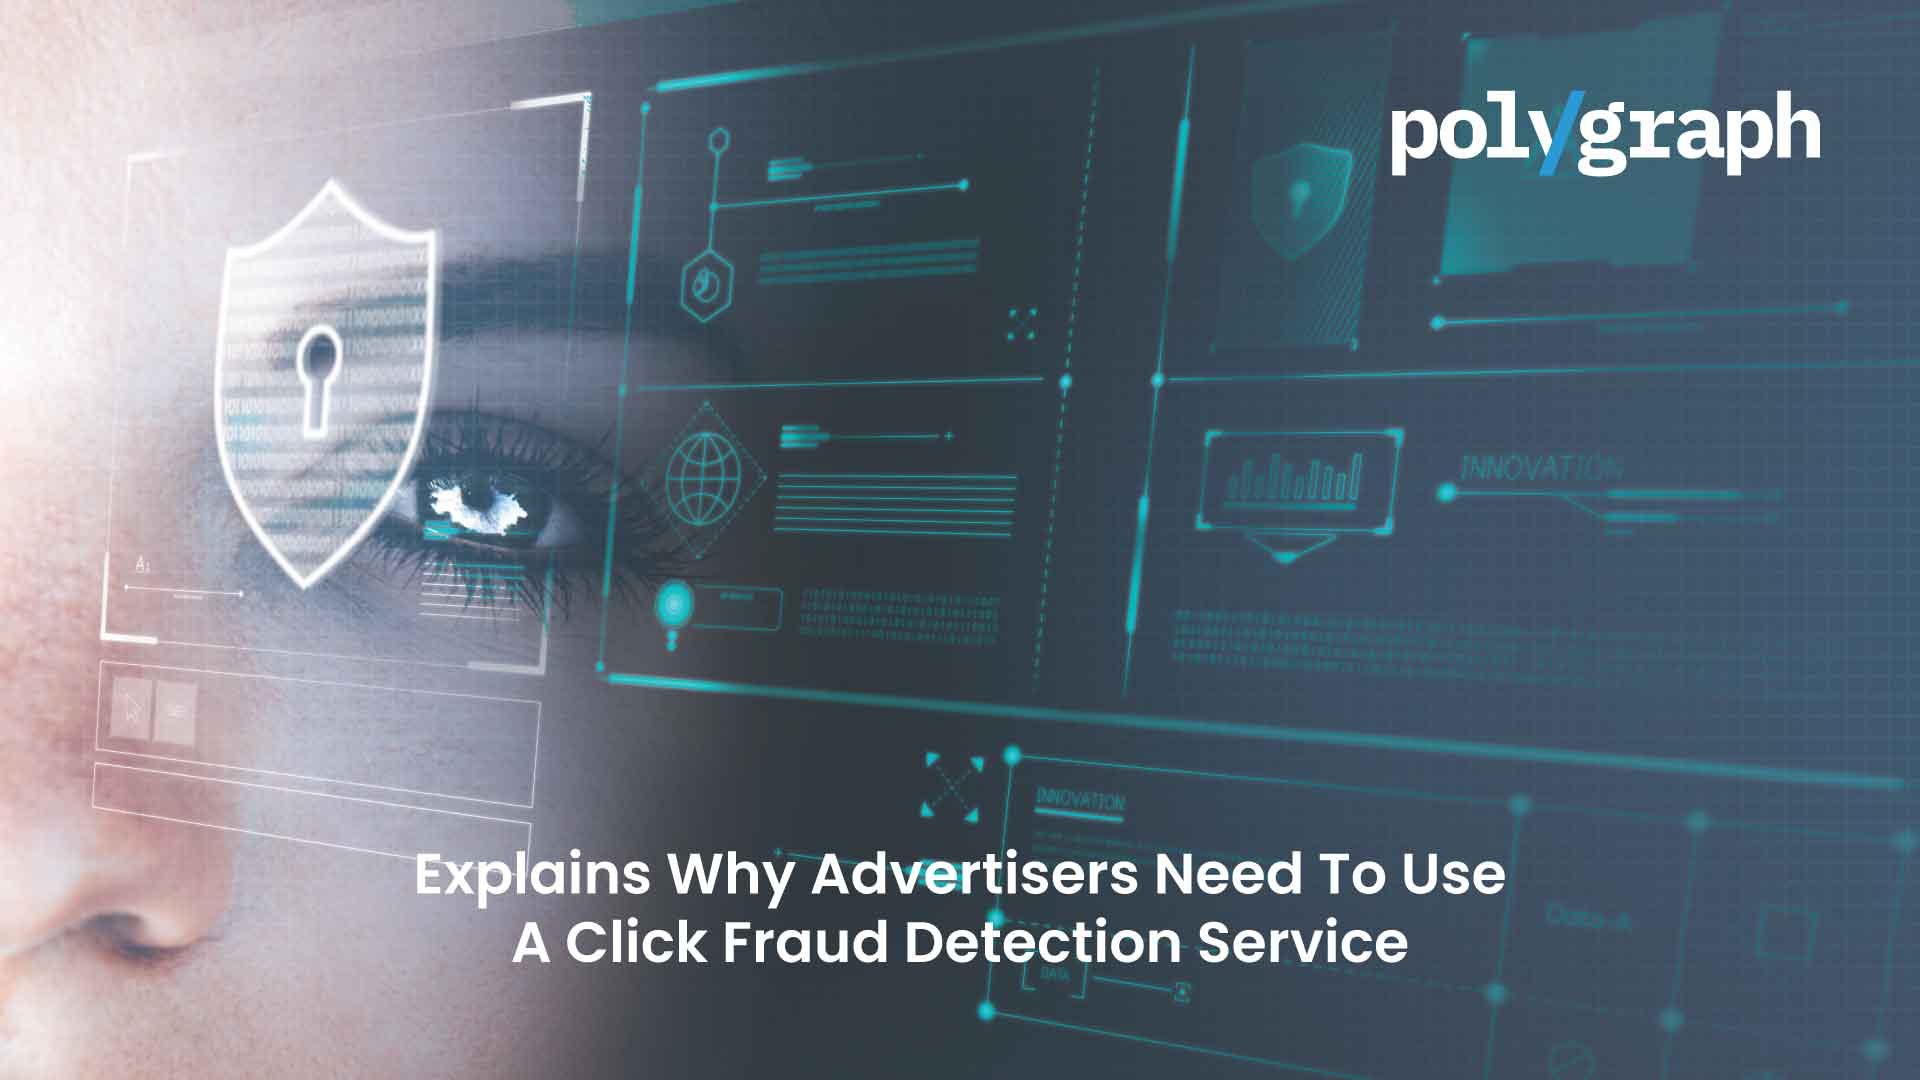 Cybersecurity Firm Polygraph Explains Why Advertisers Need To Use A Click Fraud Detection Service